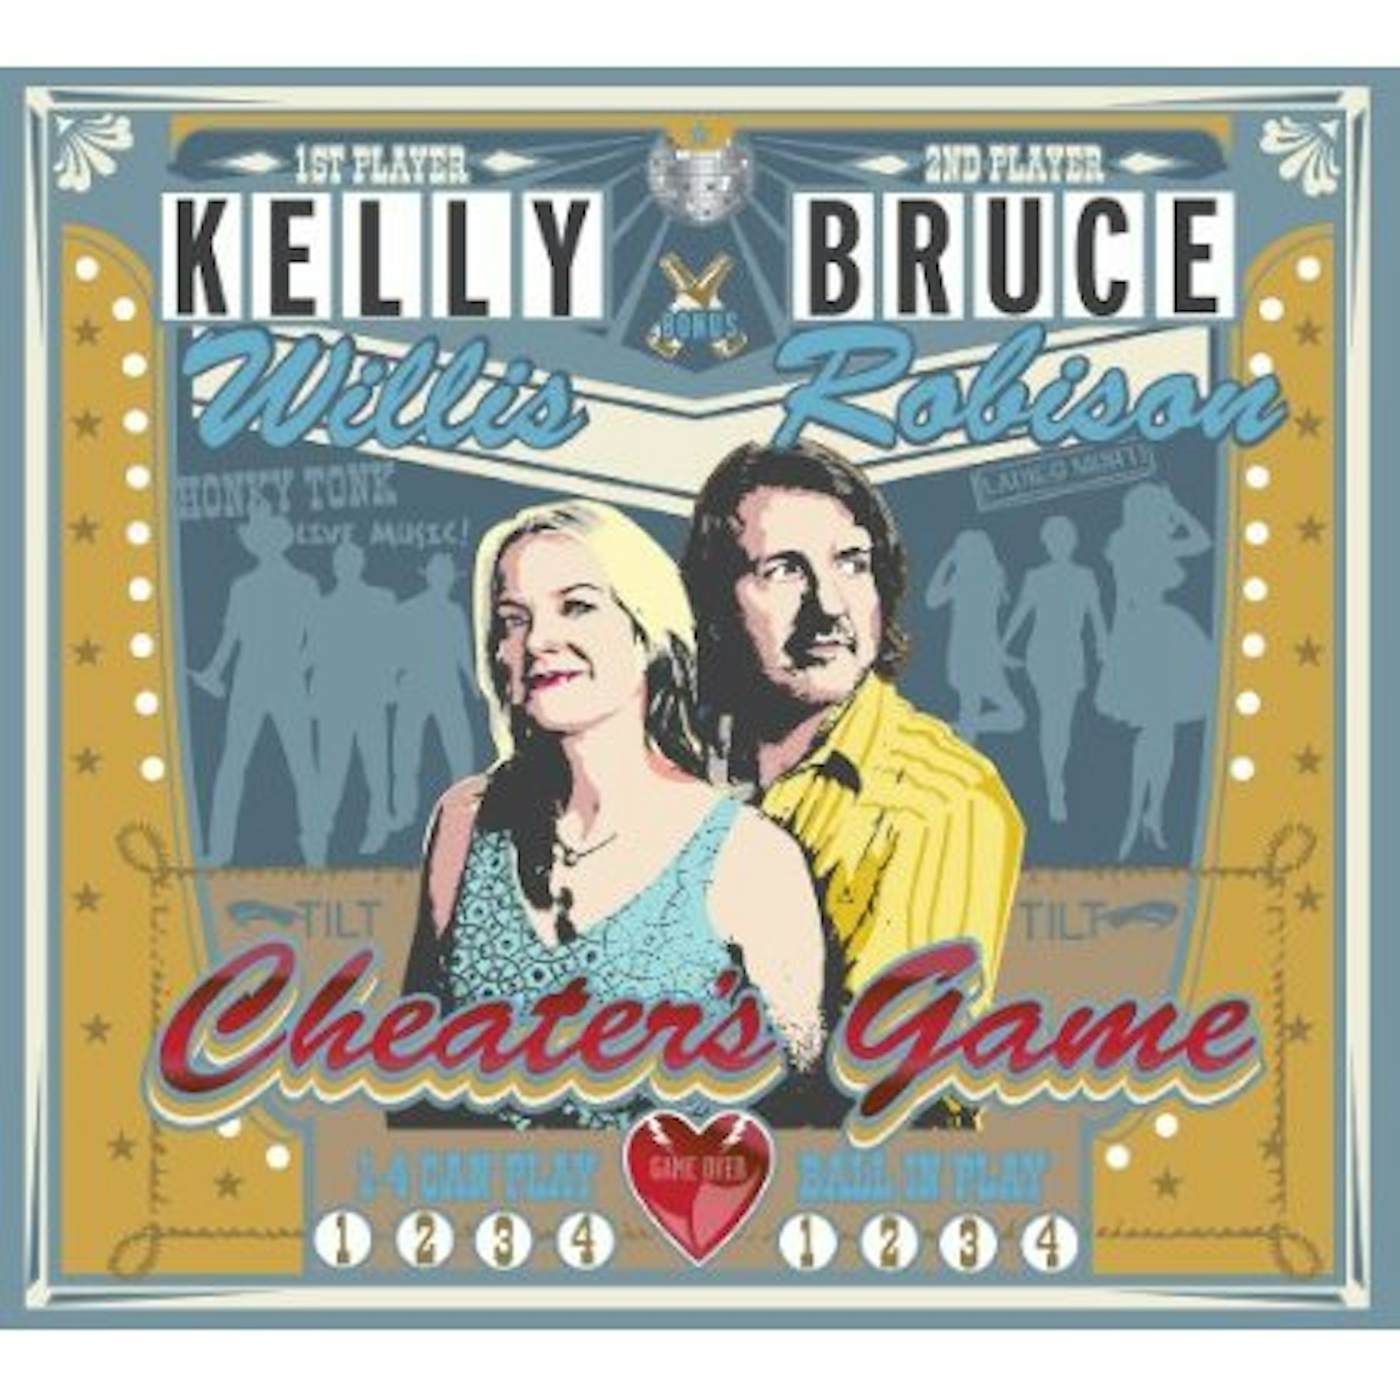 Kelly Willis & Bruce Robison Cheater's Game Vinyl Record